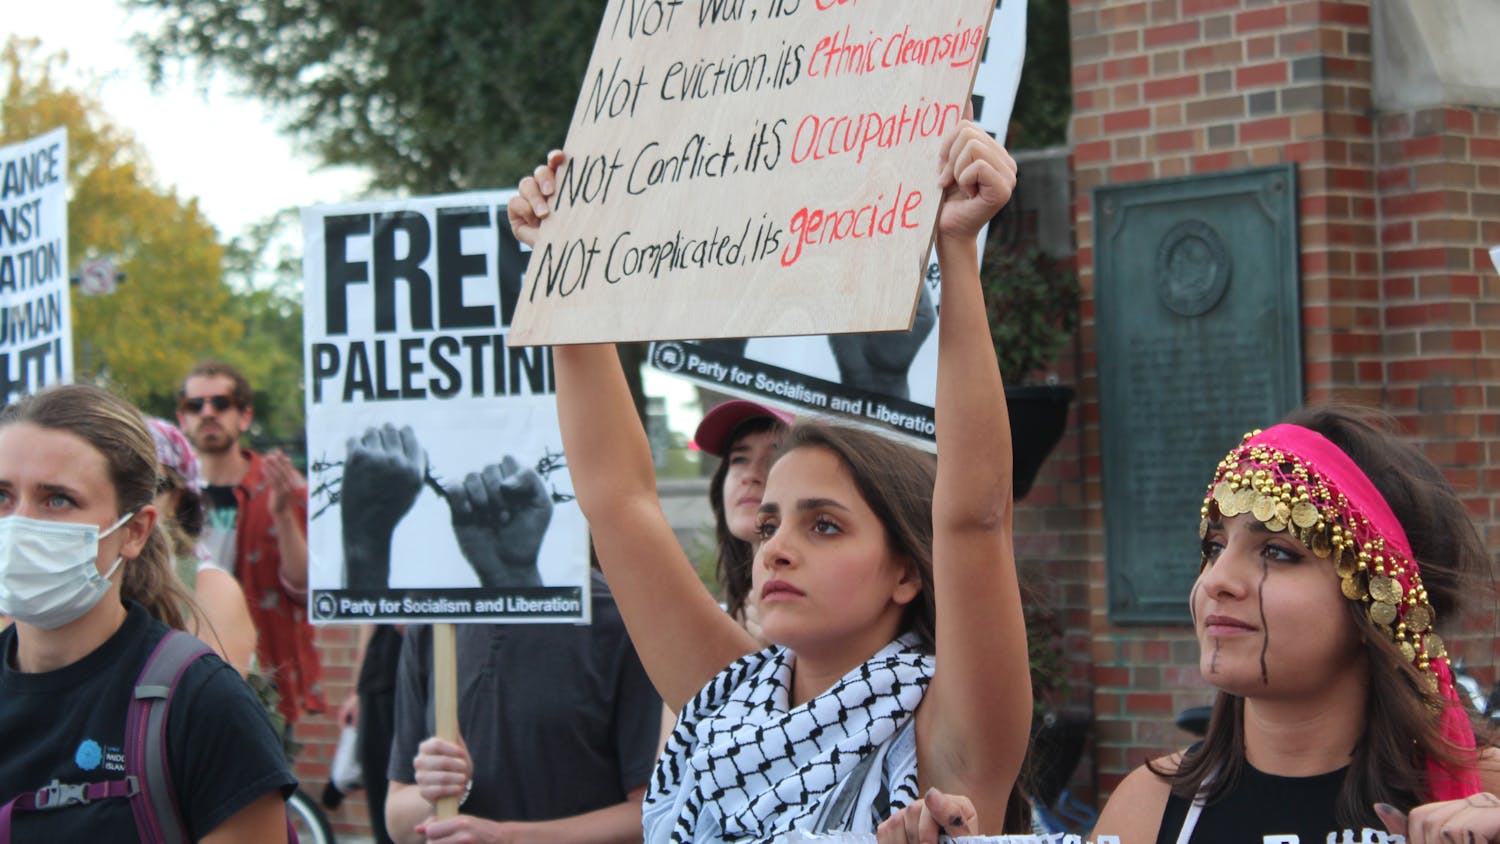 A attendee at the &quot;Stand with Palestine&quot; protest holds a &quot;Not war, it&#x27;s colonialism; not eviction, it&#x27;s ethnic cleansing; not conflict, it&#x27;s occupation; not complicated, it&#x27;s genocide&quot; sign at the corner of University Avenue on Monday, Oct. 23, 2023. 